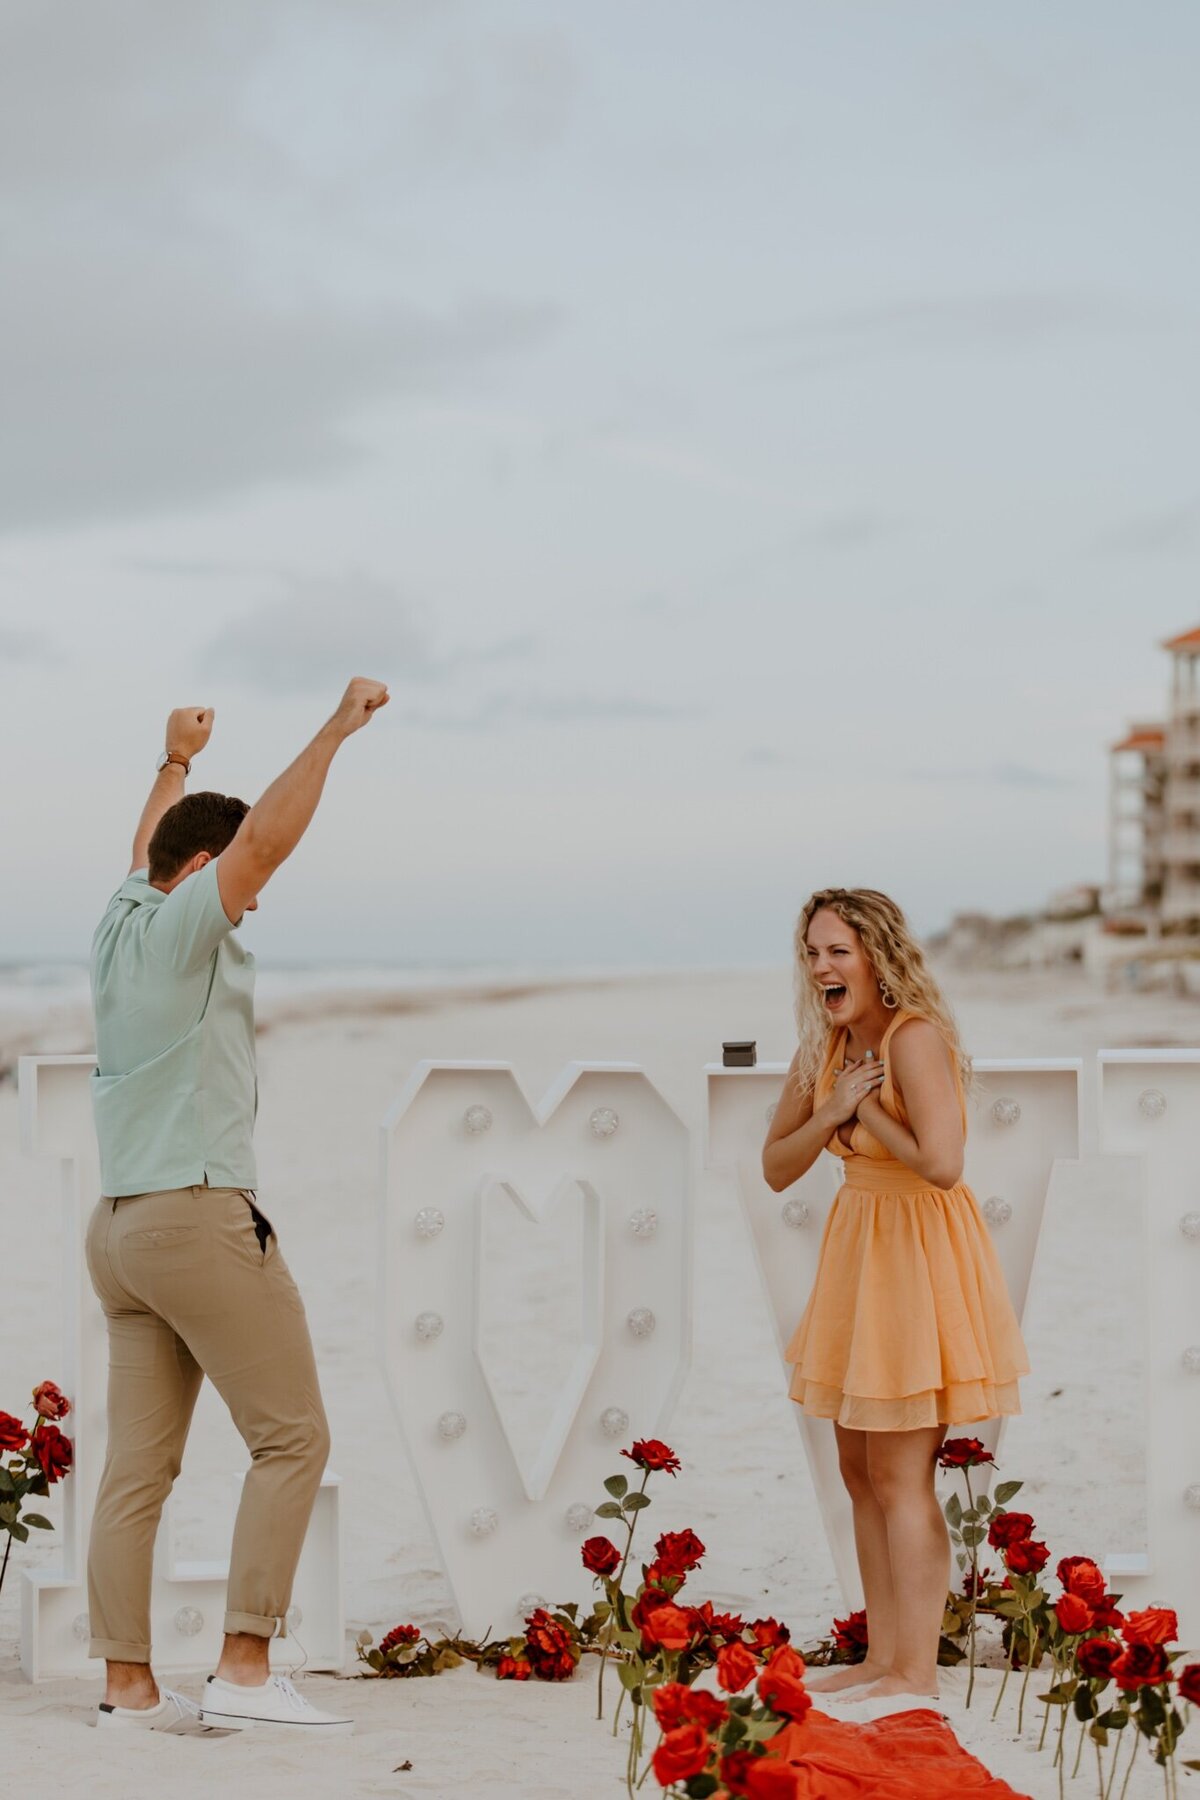 She said yes!  New Smyrna Beach Proposal in Florida